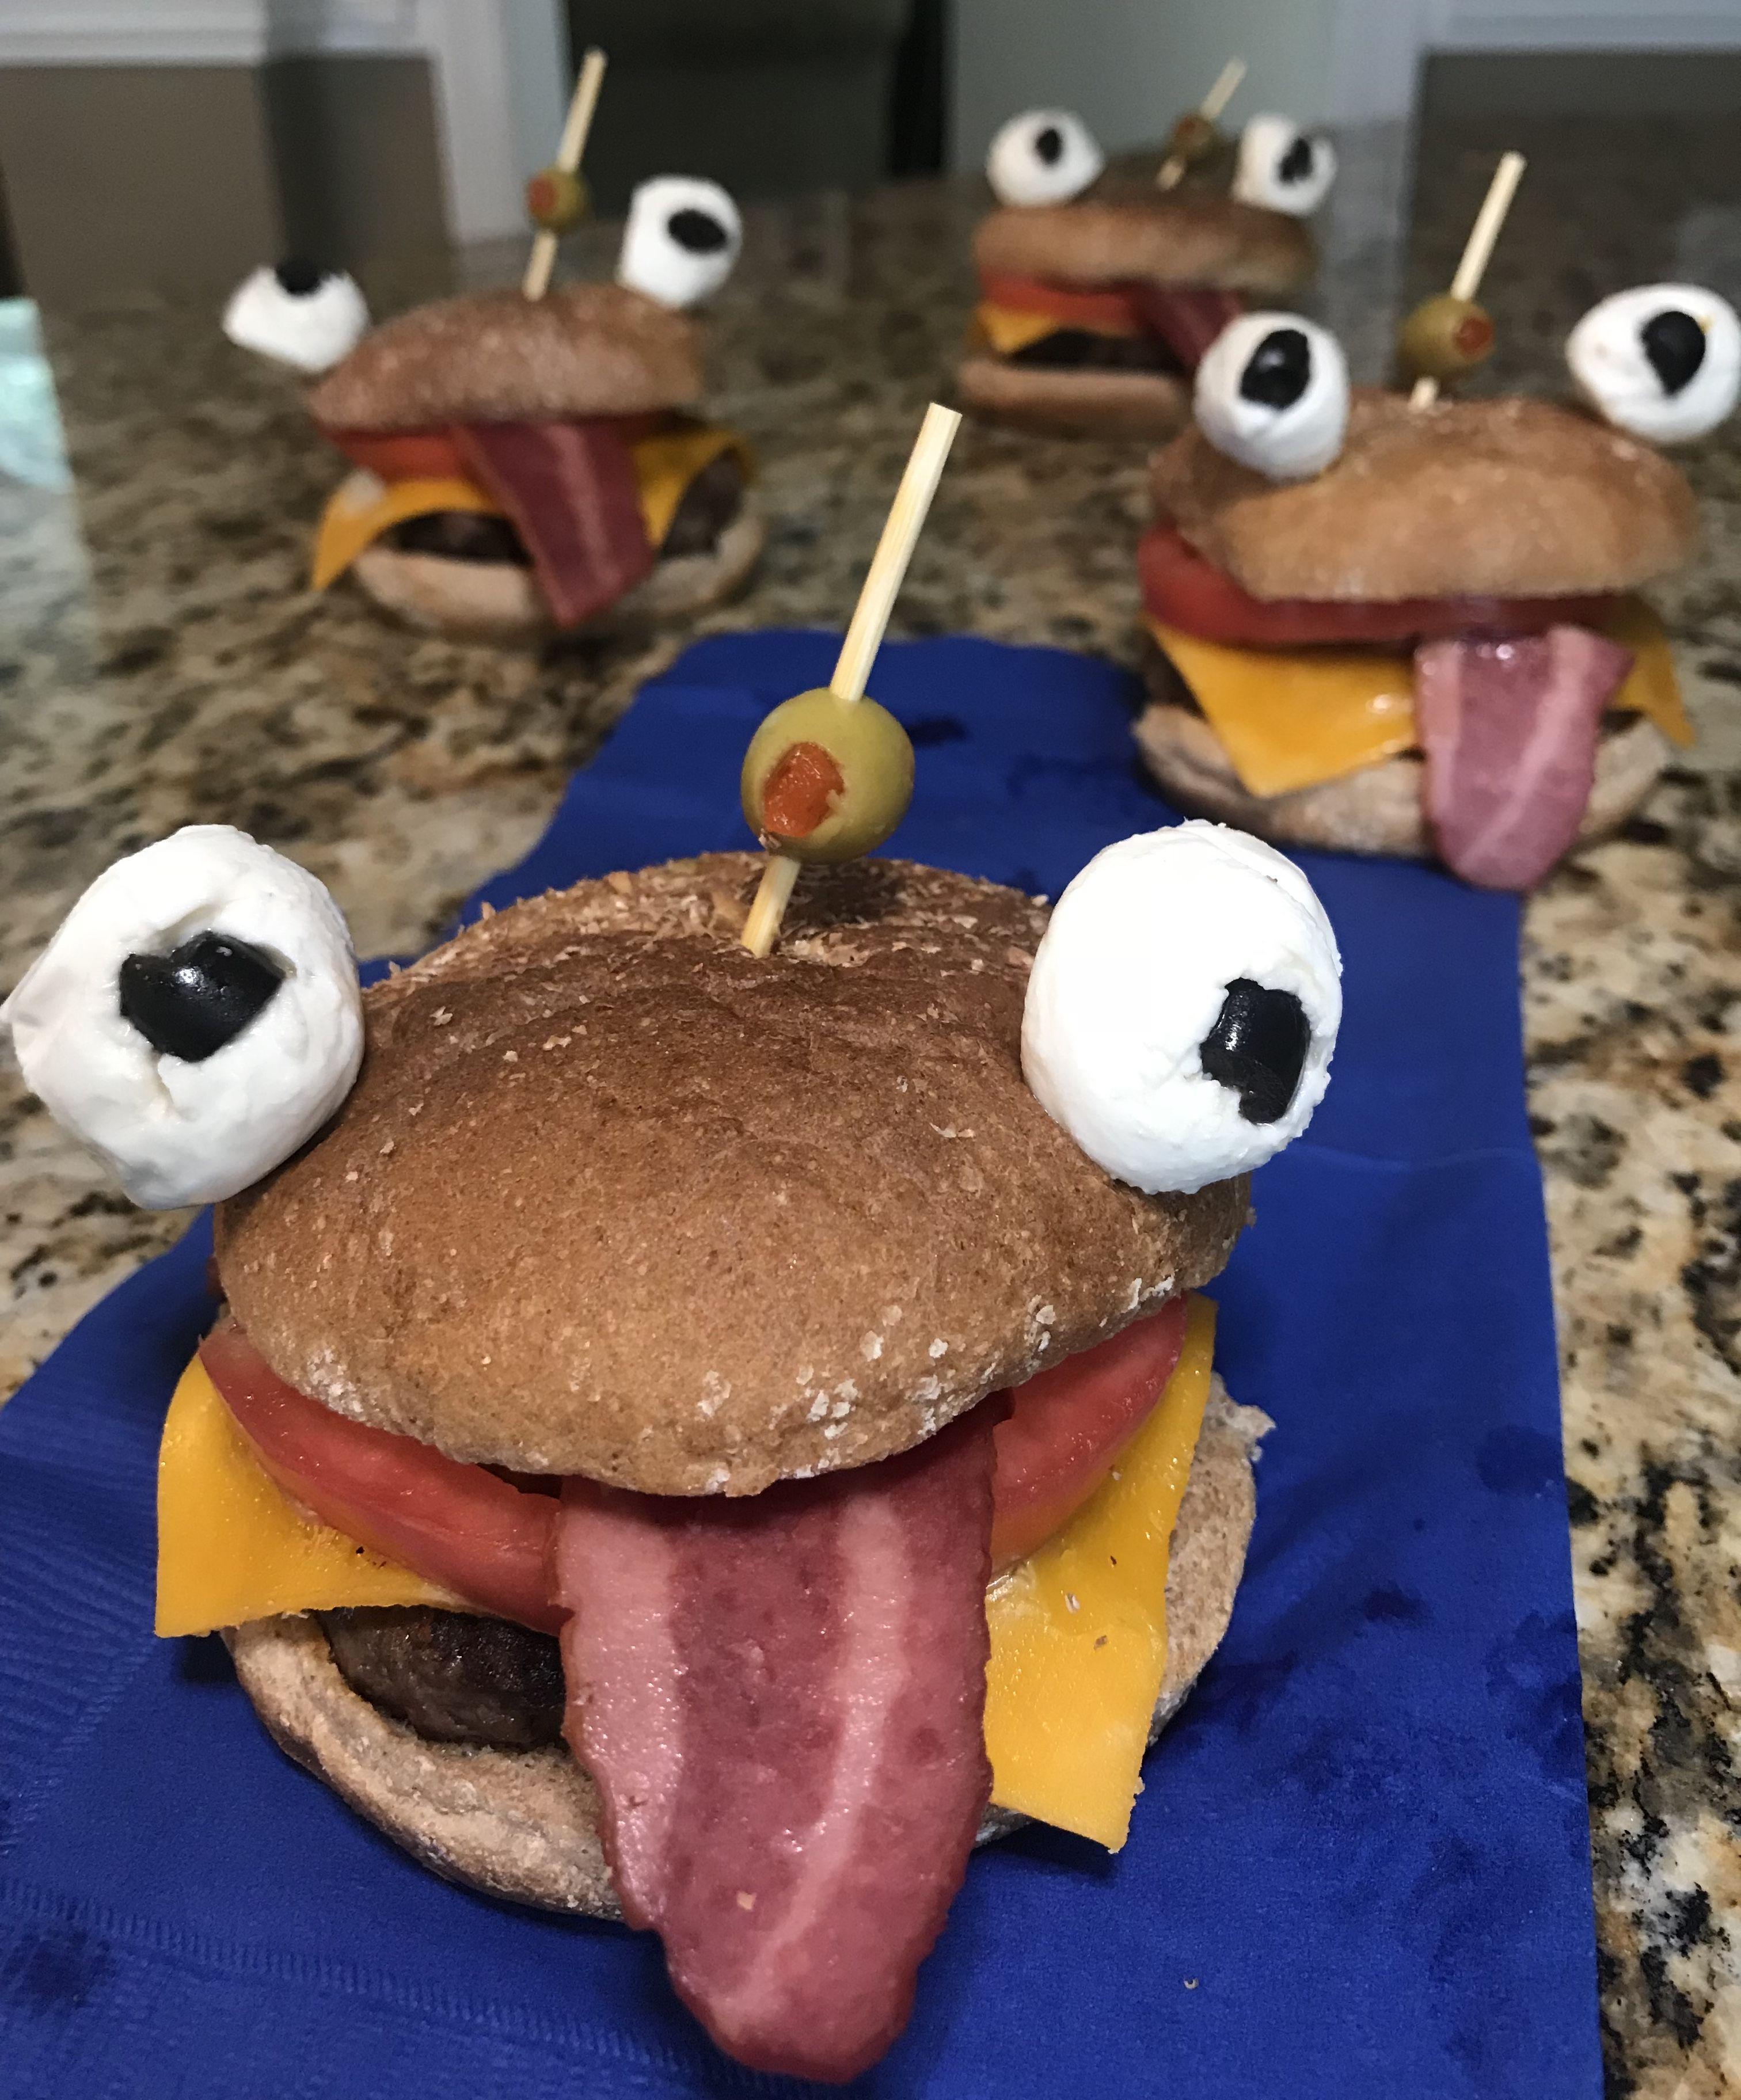 Durr Burger Logo - Beefy Onion Durr Burgers! Oh yeah baby, let's eat some Fortnite food